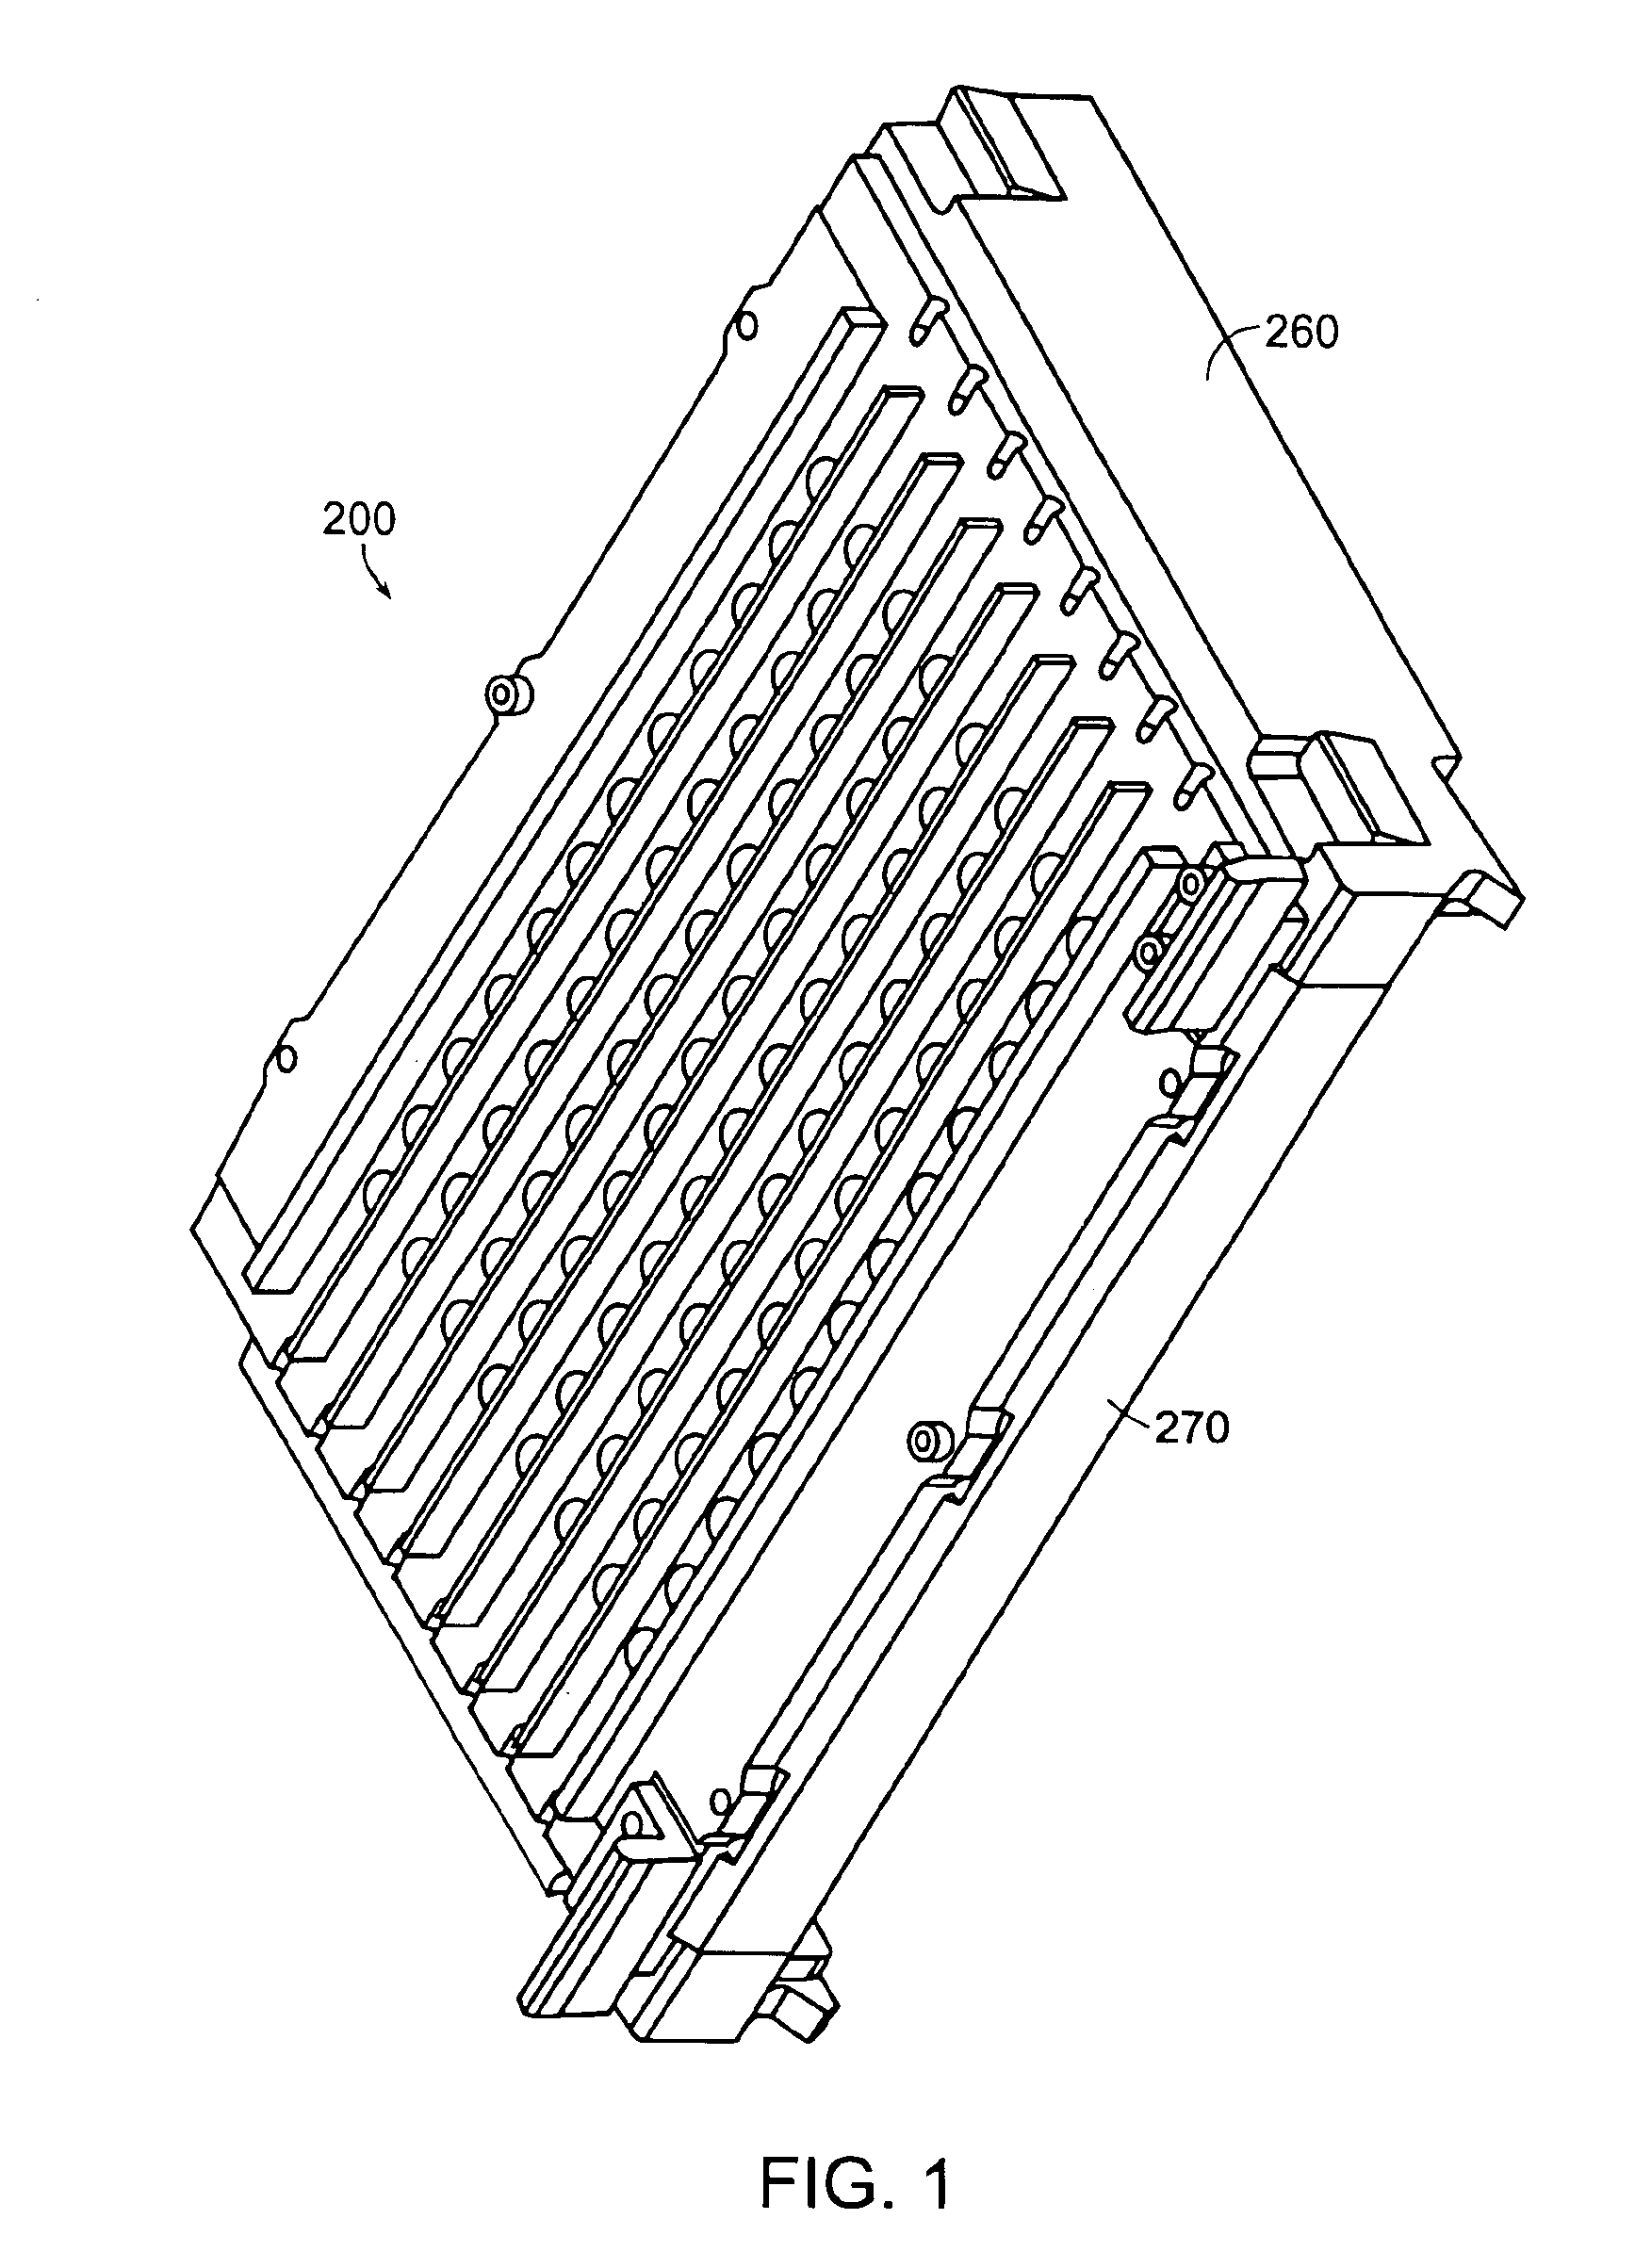 Apparatus and method for flexible heating cover assembly for thermal cycling of samples of biological material